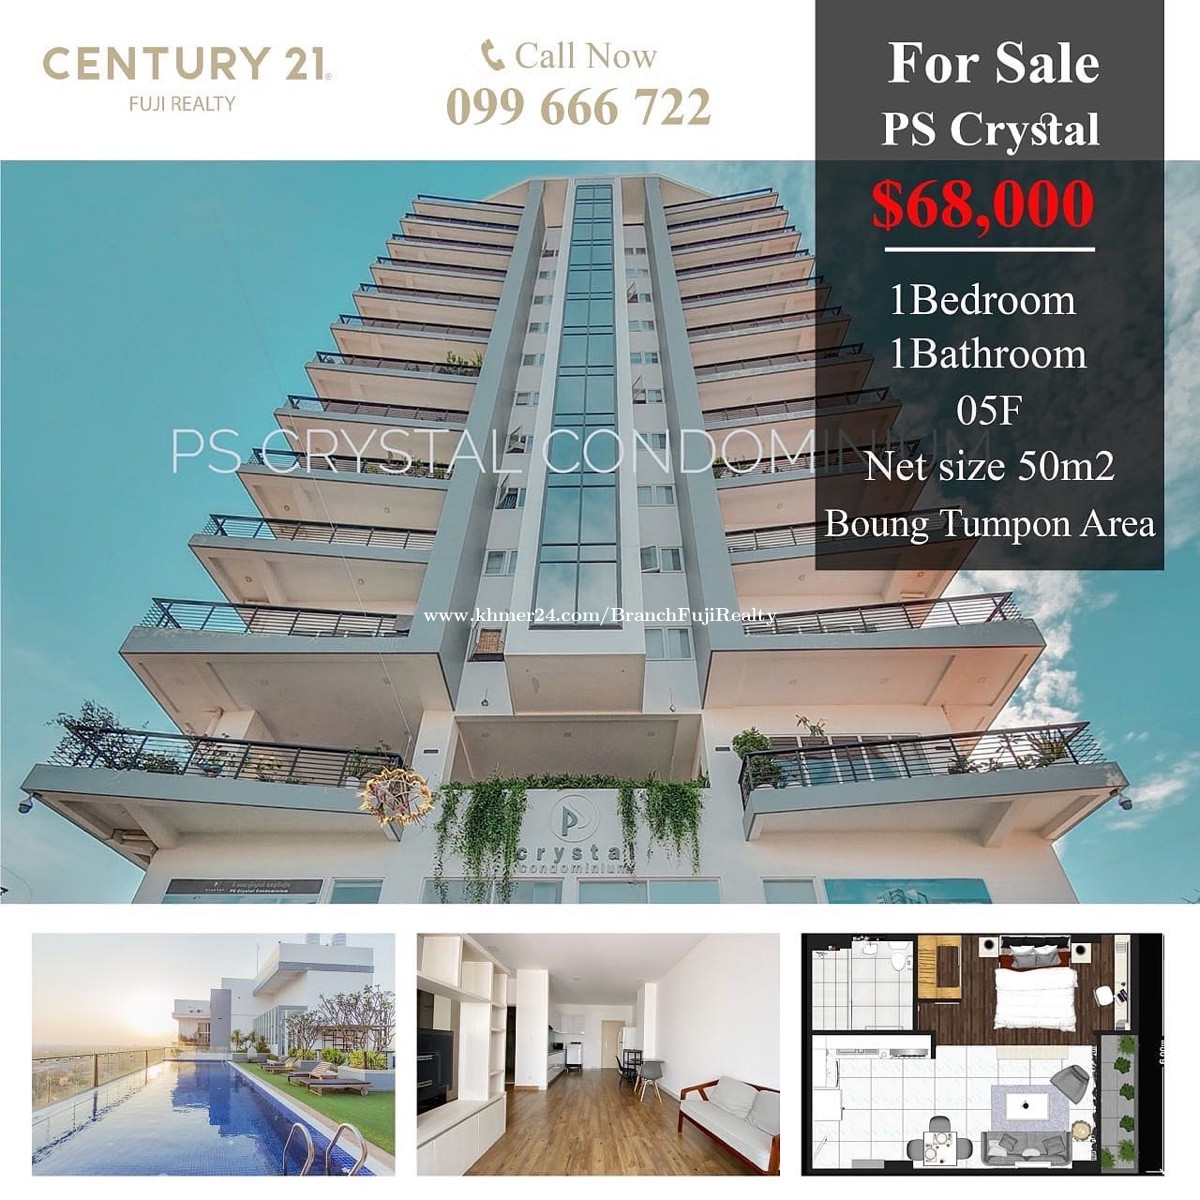 Ps Crystal condo for sale